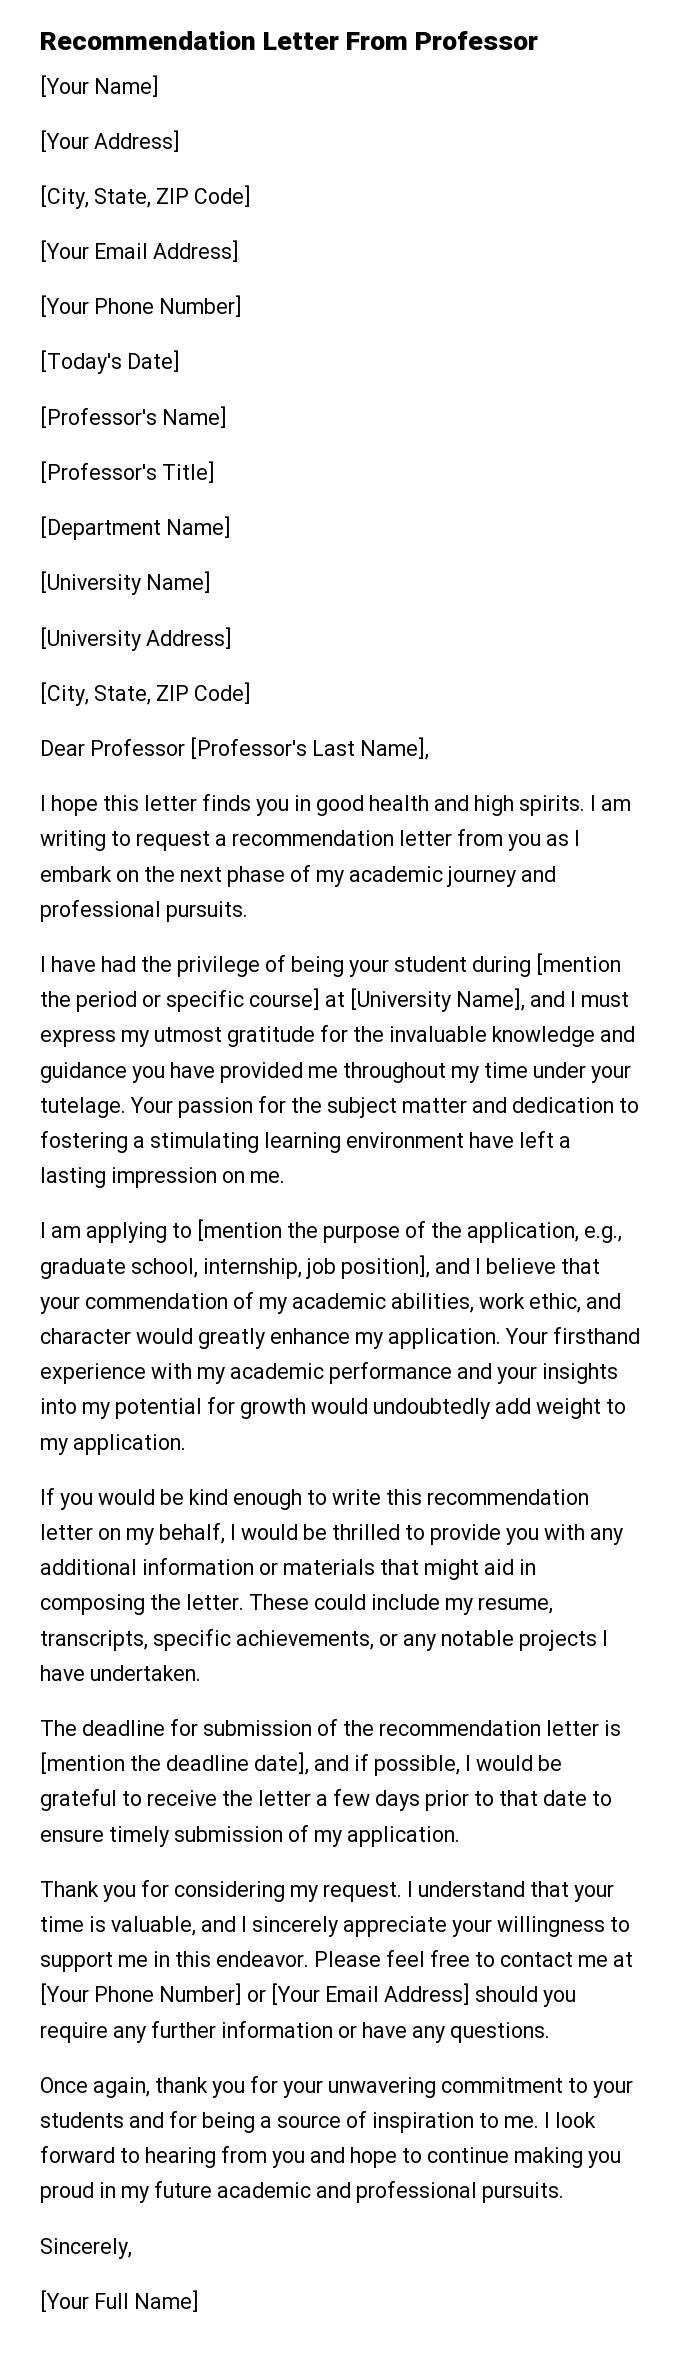 Recommendation Letter From Professor